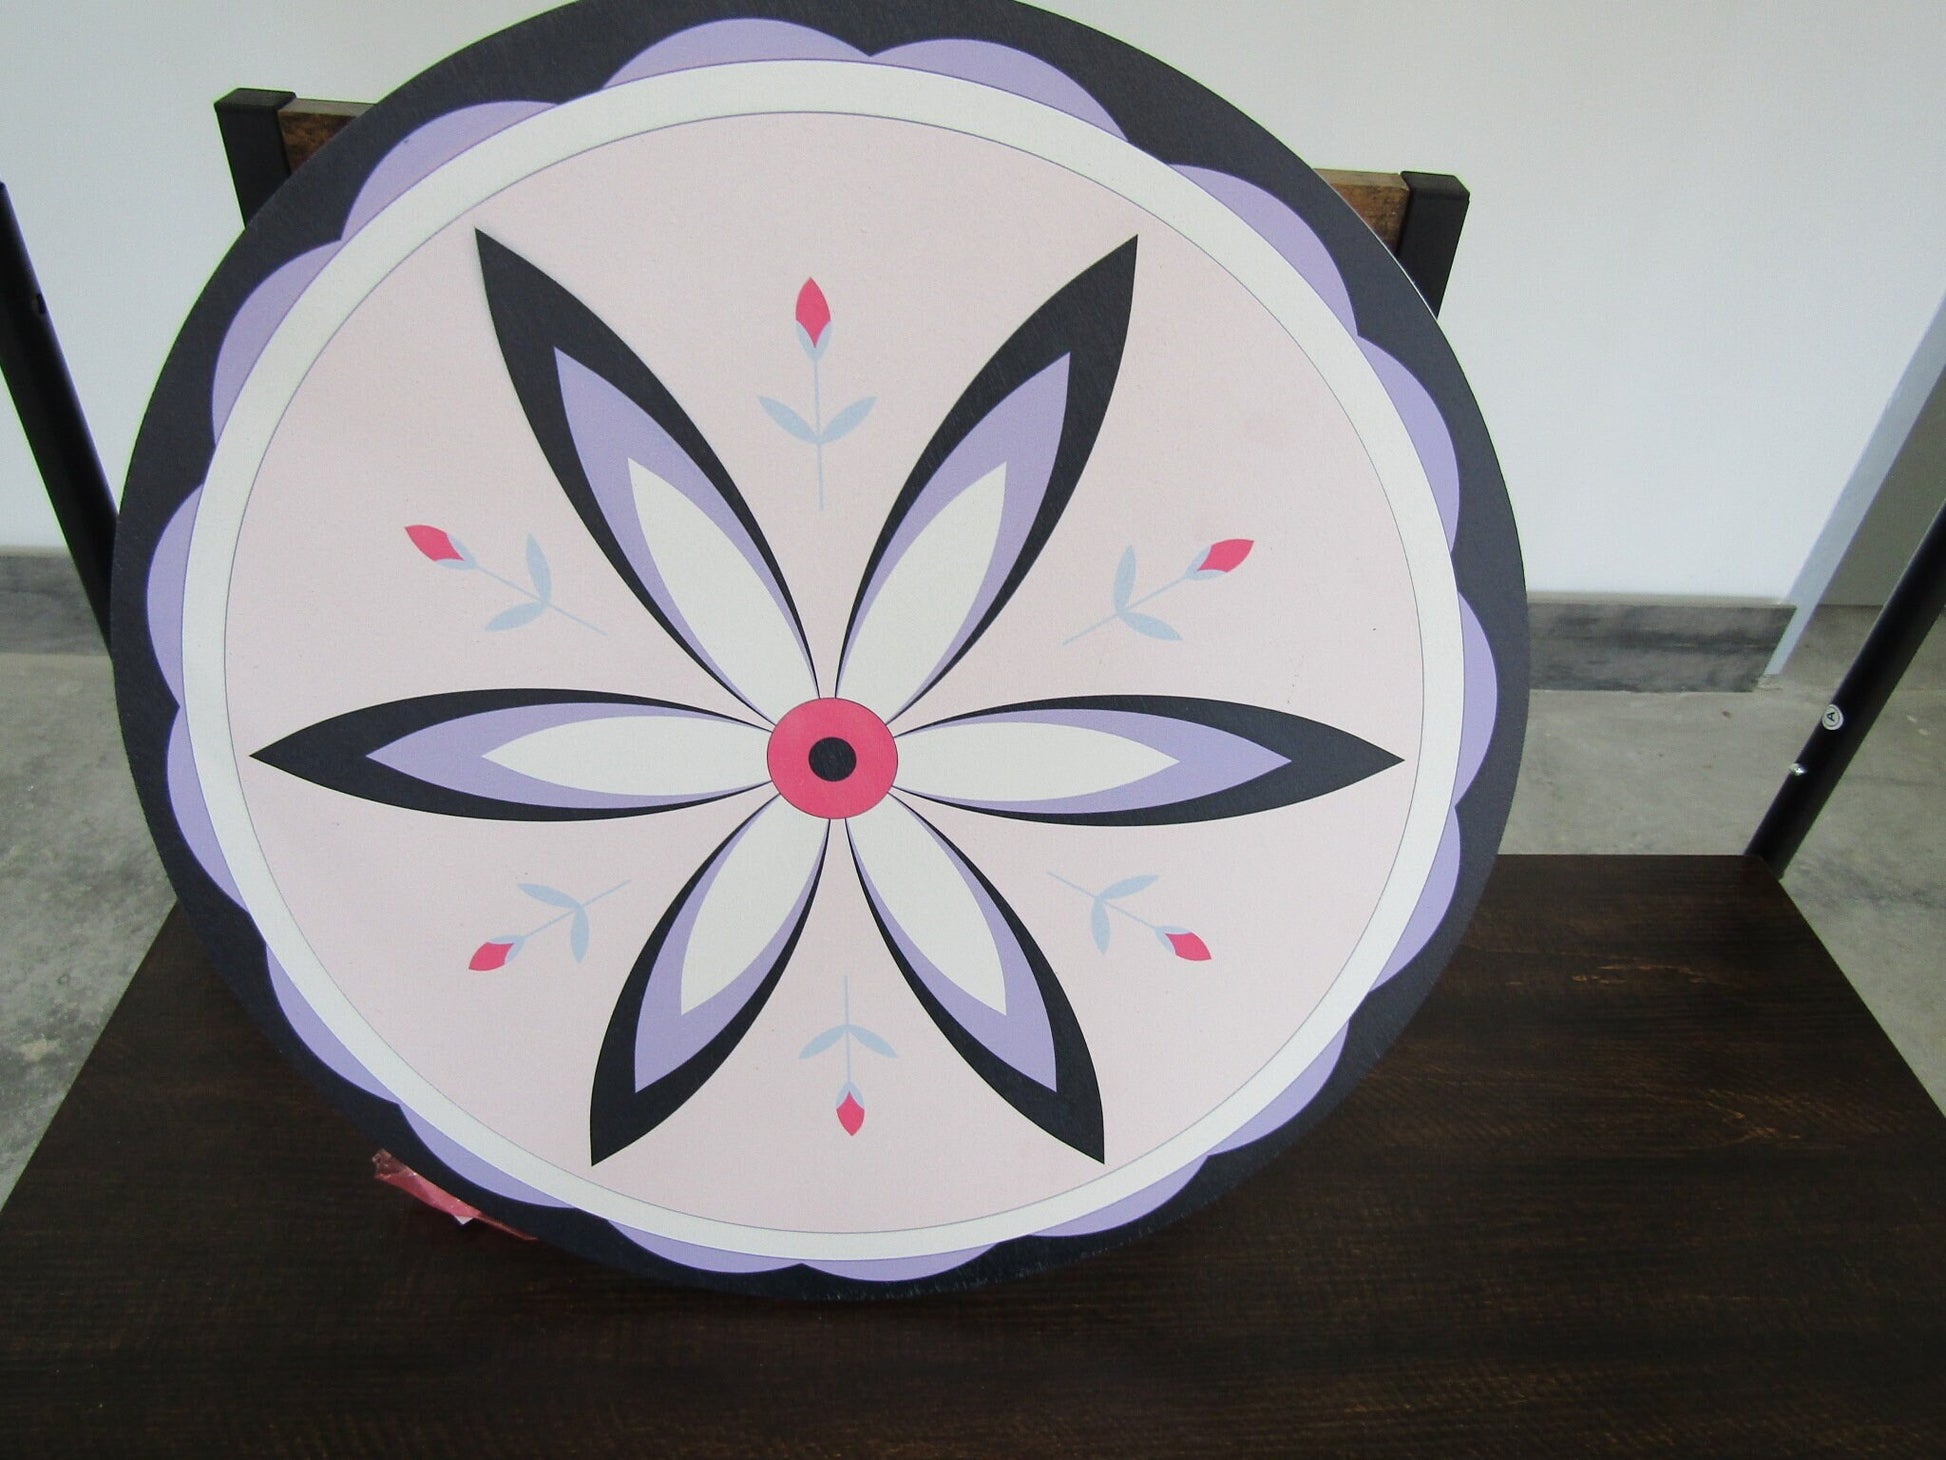 Round Unique Barn Quilt Floral Purple Circle Printed Image UVprinted On Wood Wooden Sign Geometric Shape Image Rustic Primitive Large